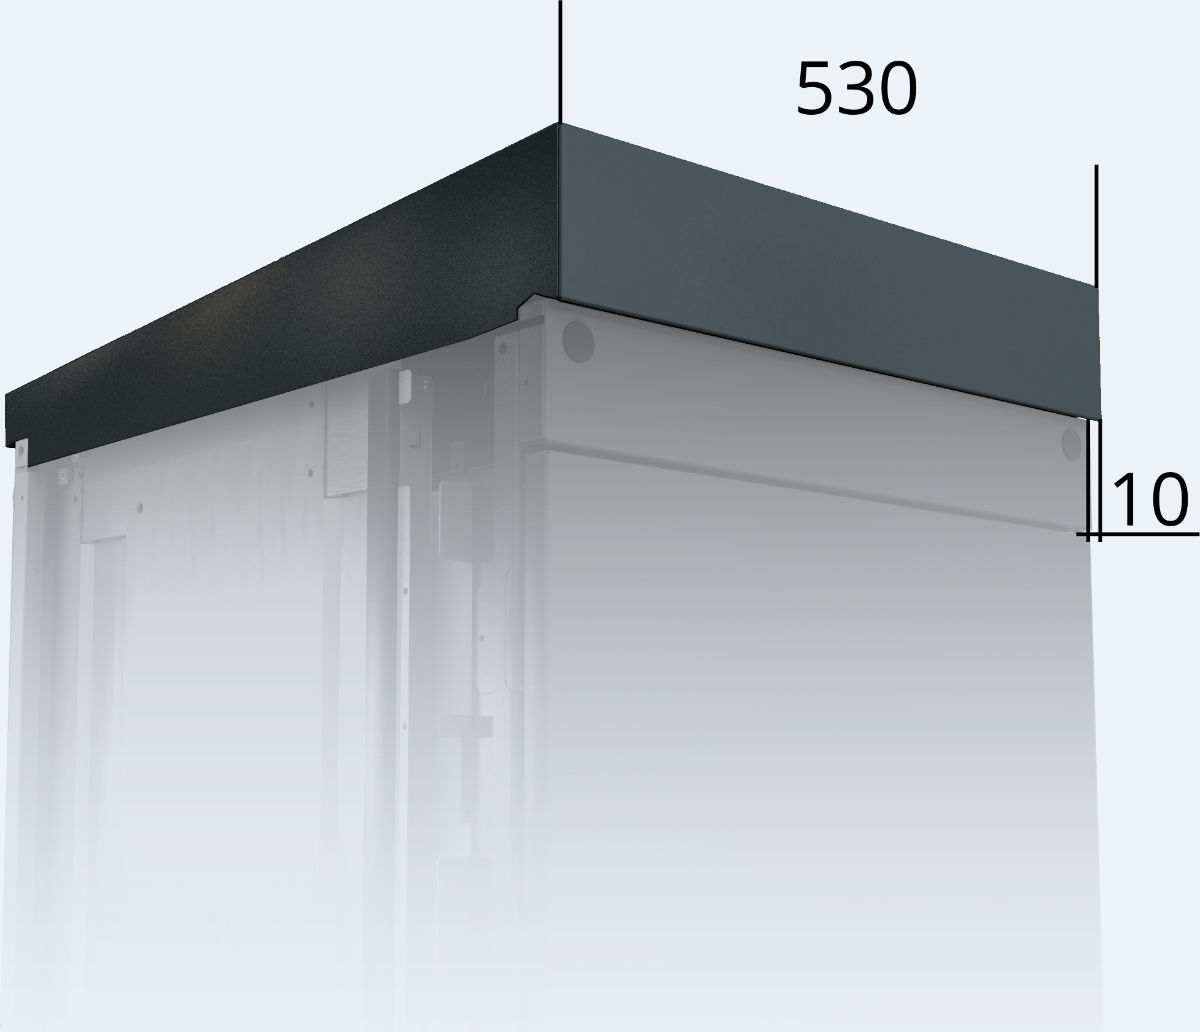 Top with a reduced overhang 10 for outdoor cabinet units 530